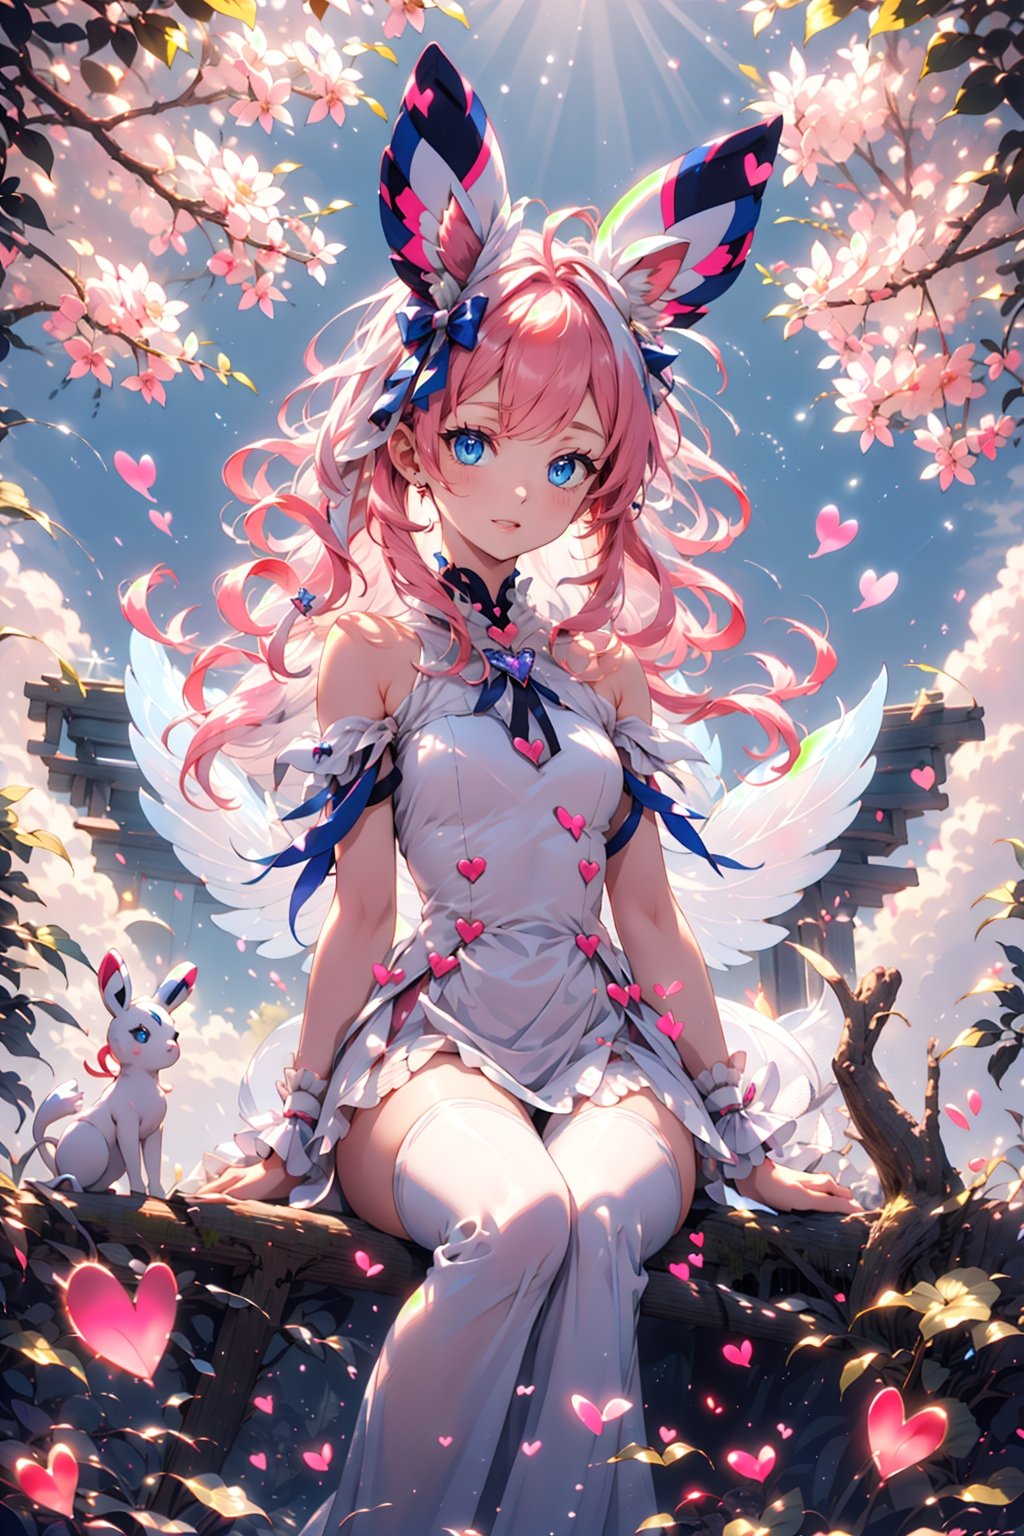 sylveon, human, pink hair, ribbons, fairy-like appearance, long pink hair, blue eyes, frilly outfit, hearts, white dress,coloured glaze,fairy,perfect, daytime, sunny, bright sunlight, sitting